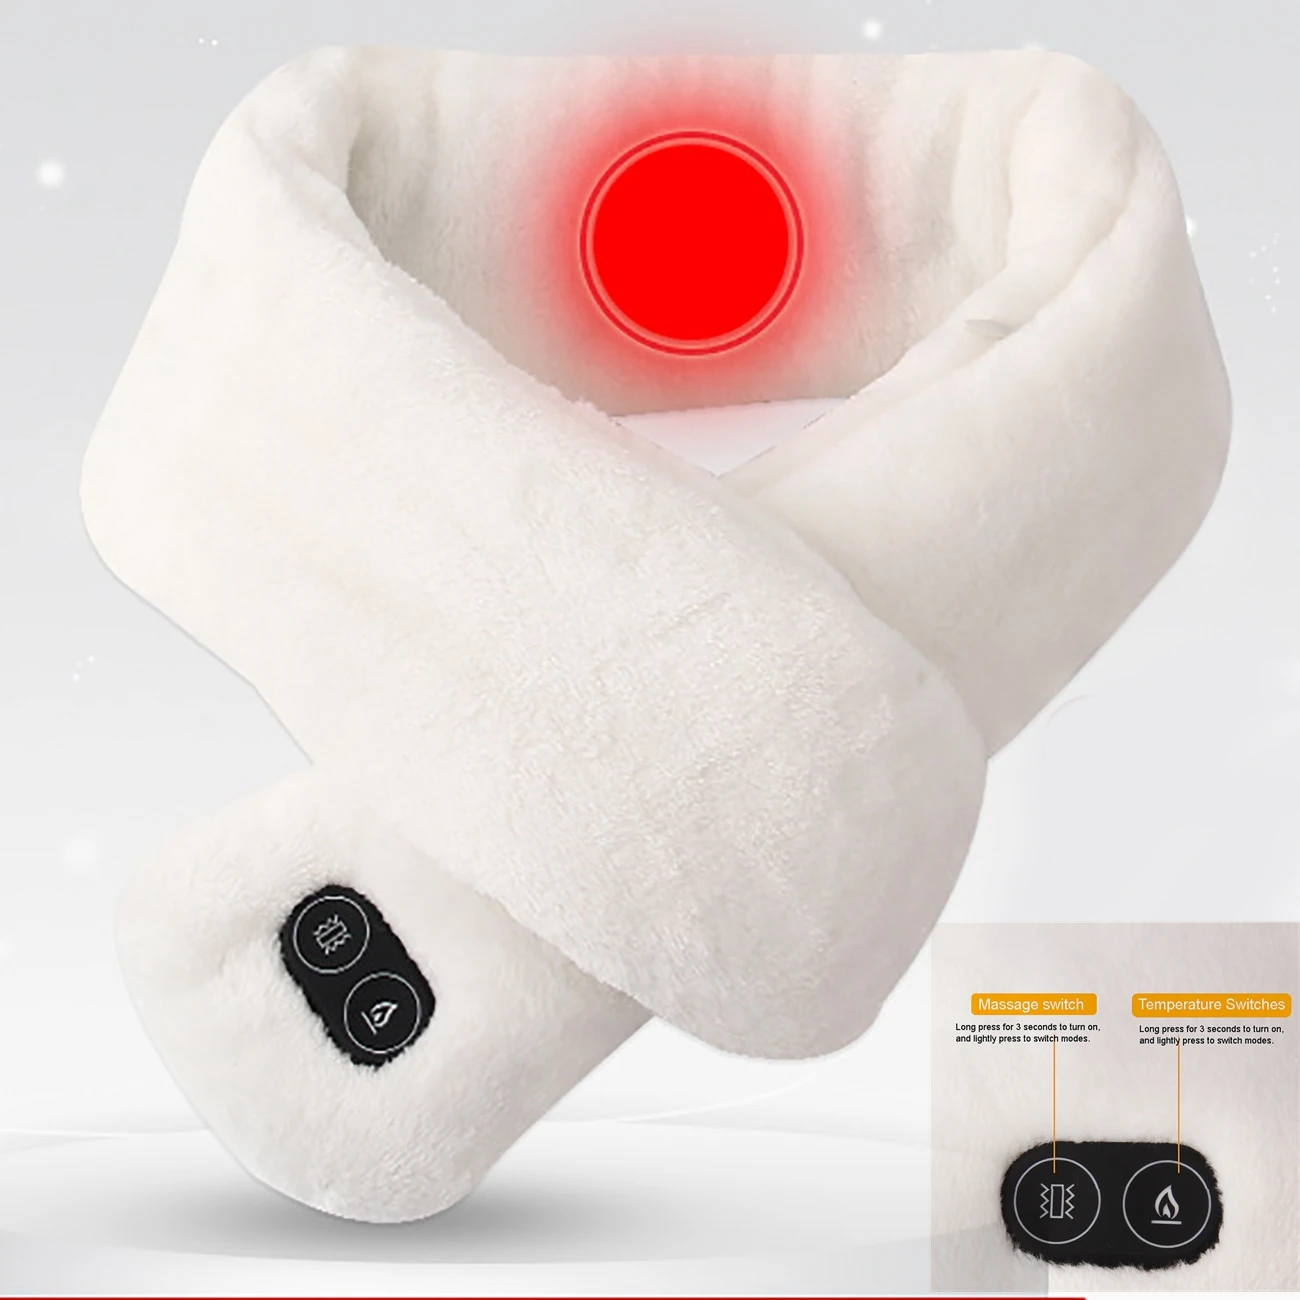 

3 Gears Smart Heated Electric Scarf Heating Winter Hiking Scarves 4 Modes Vibration Massage USB Charge Outdoor Sport Neckerchief